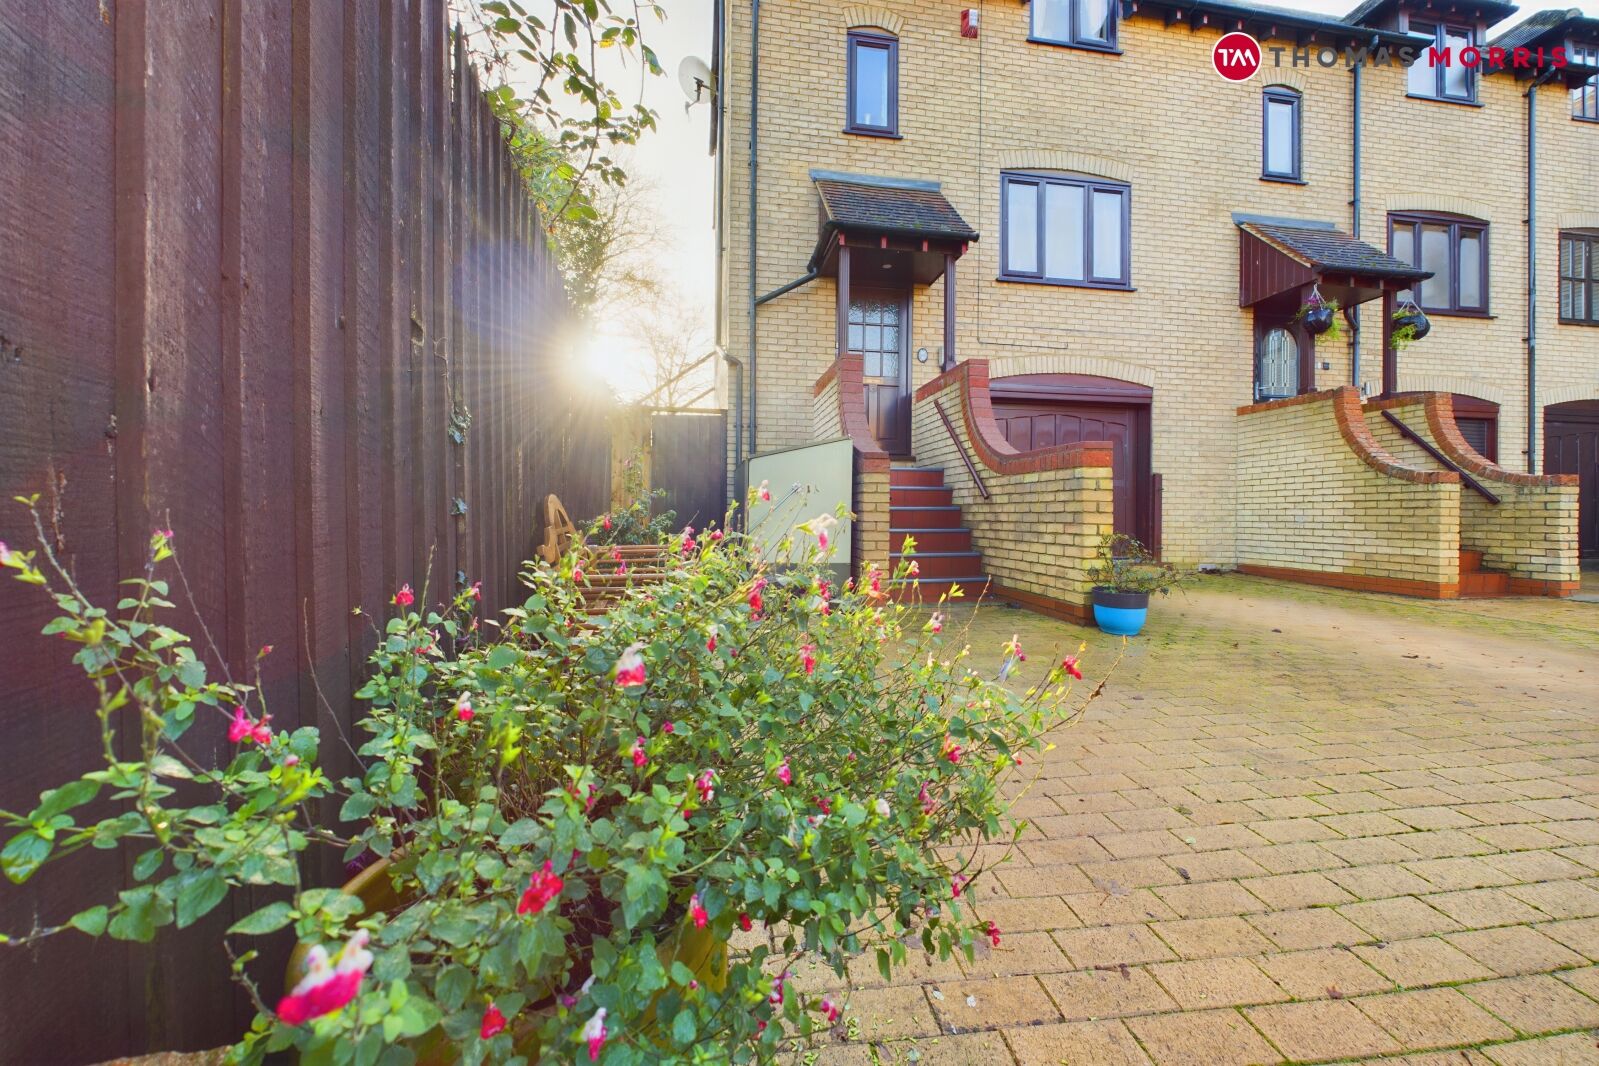 2 bedroom end terraced house for sale Lion Yard, High Street, PE26, main image